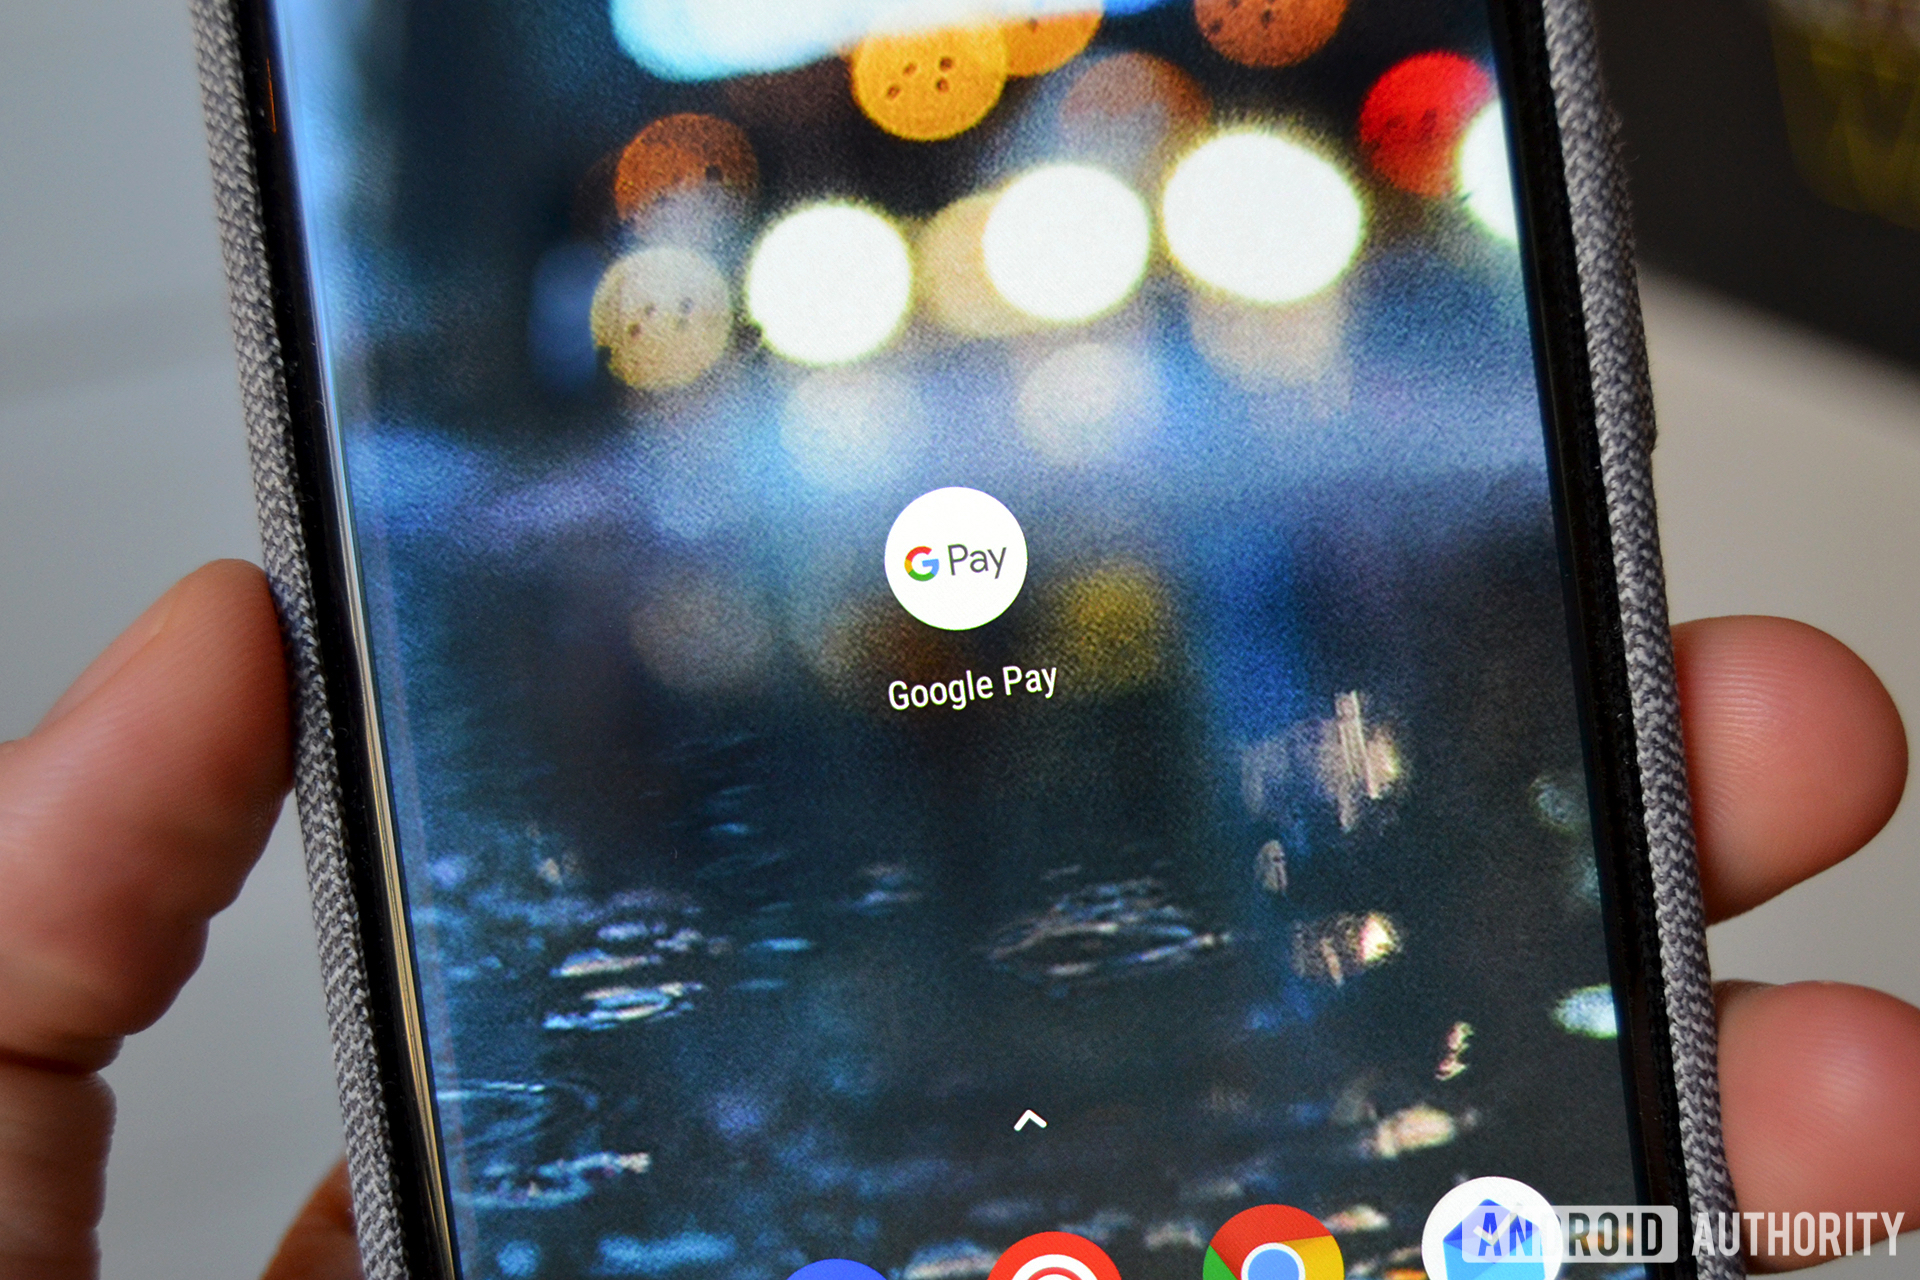 The Google Pay logo on a smartphone.